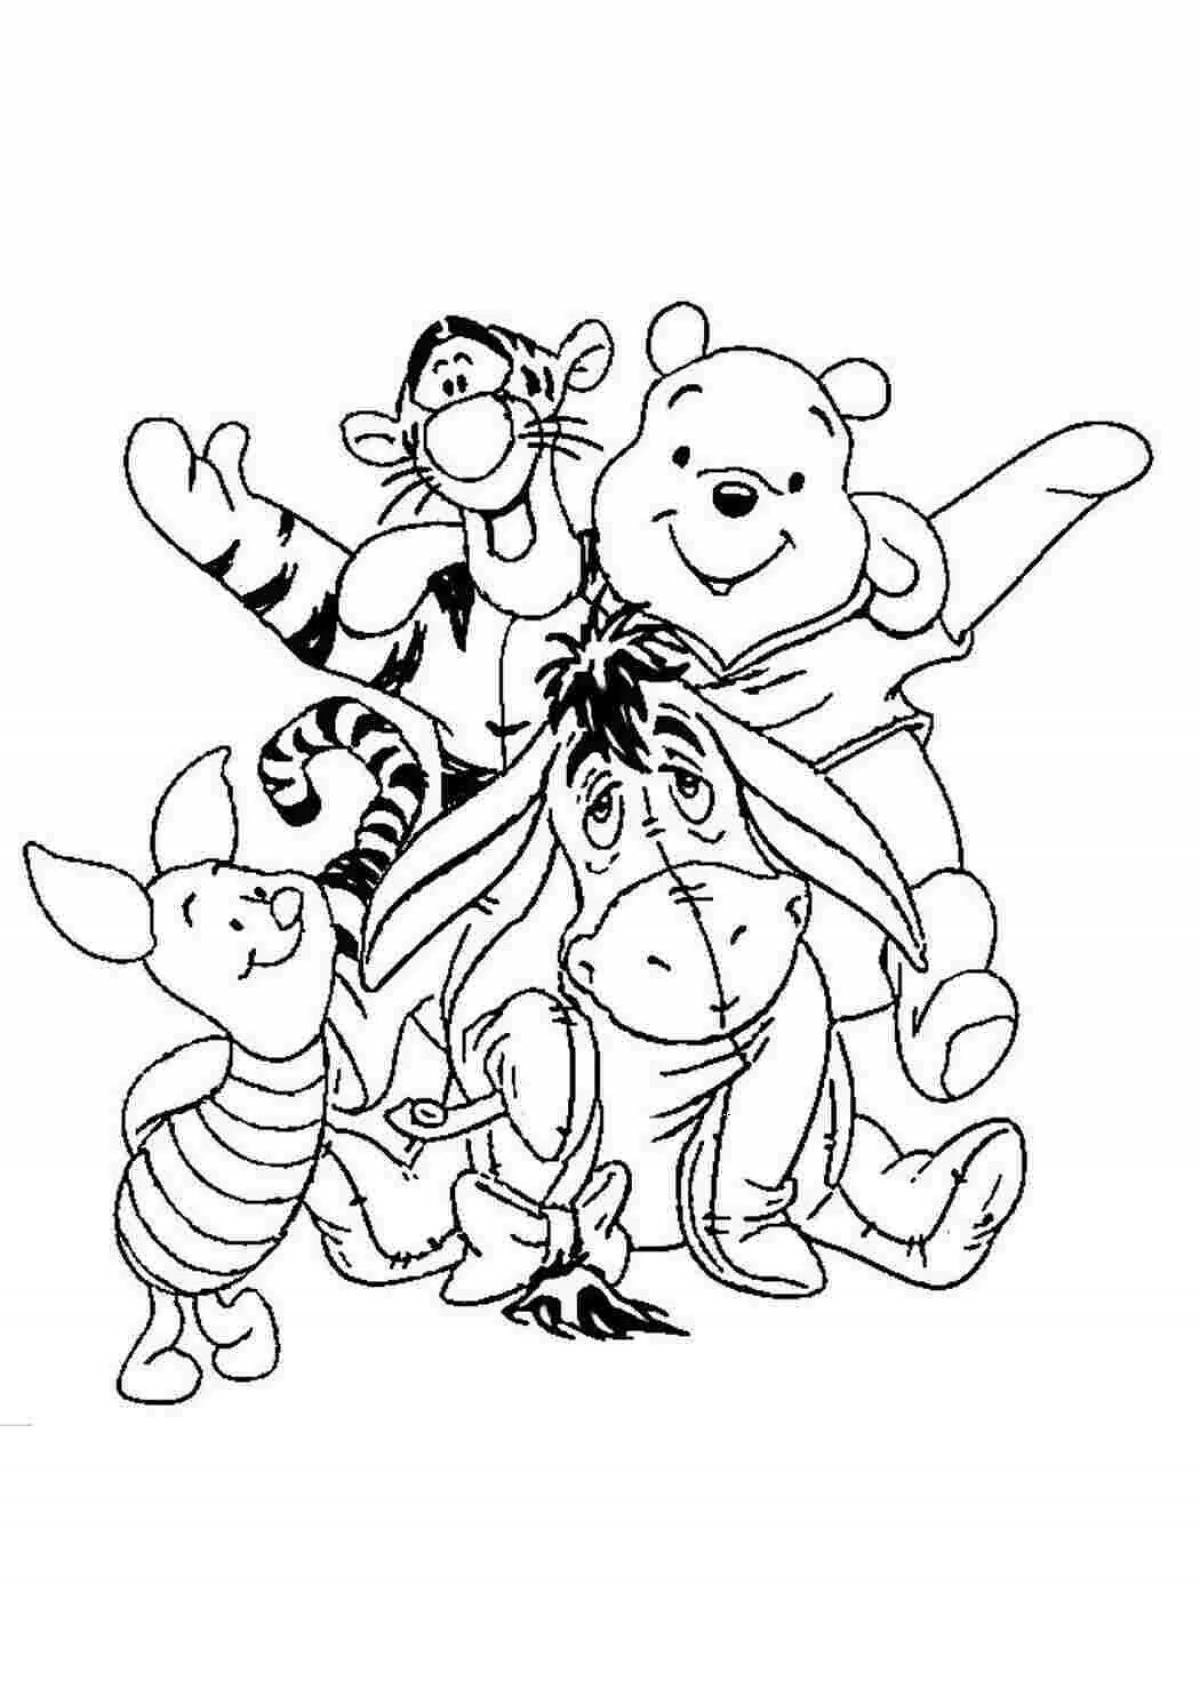 Winnie the pooh and his friends #4